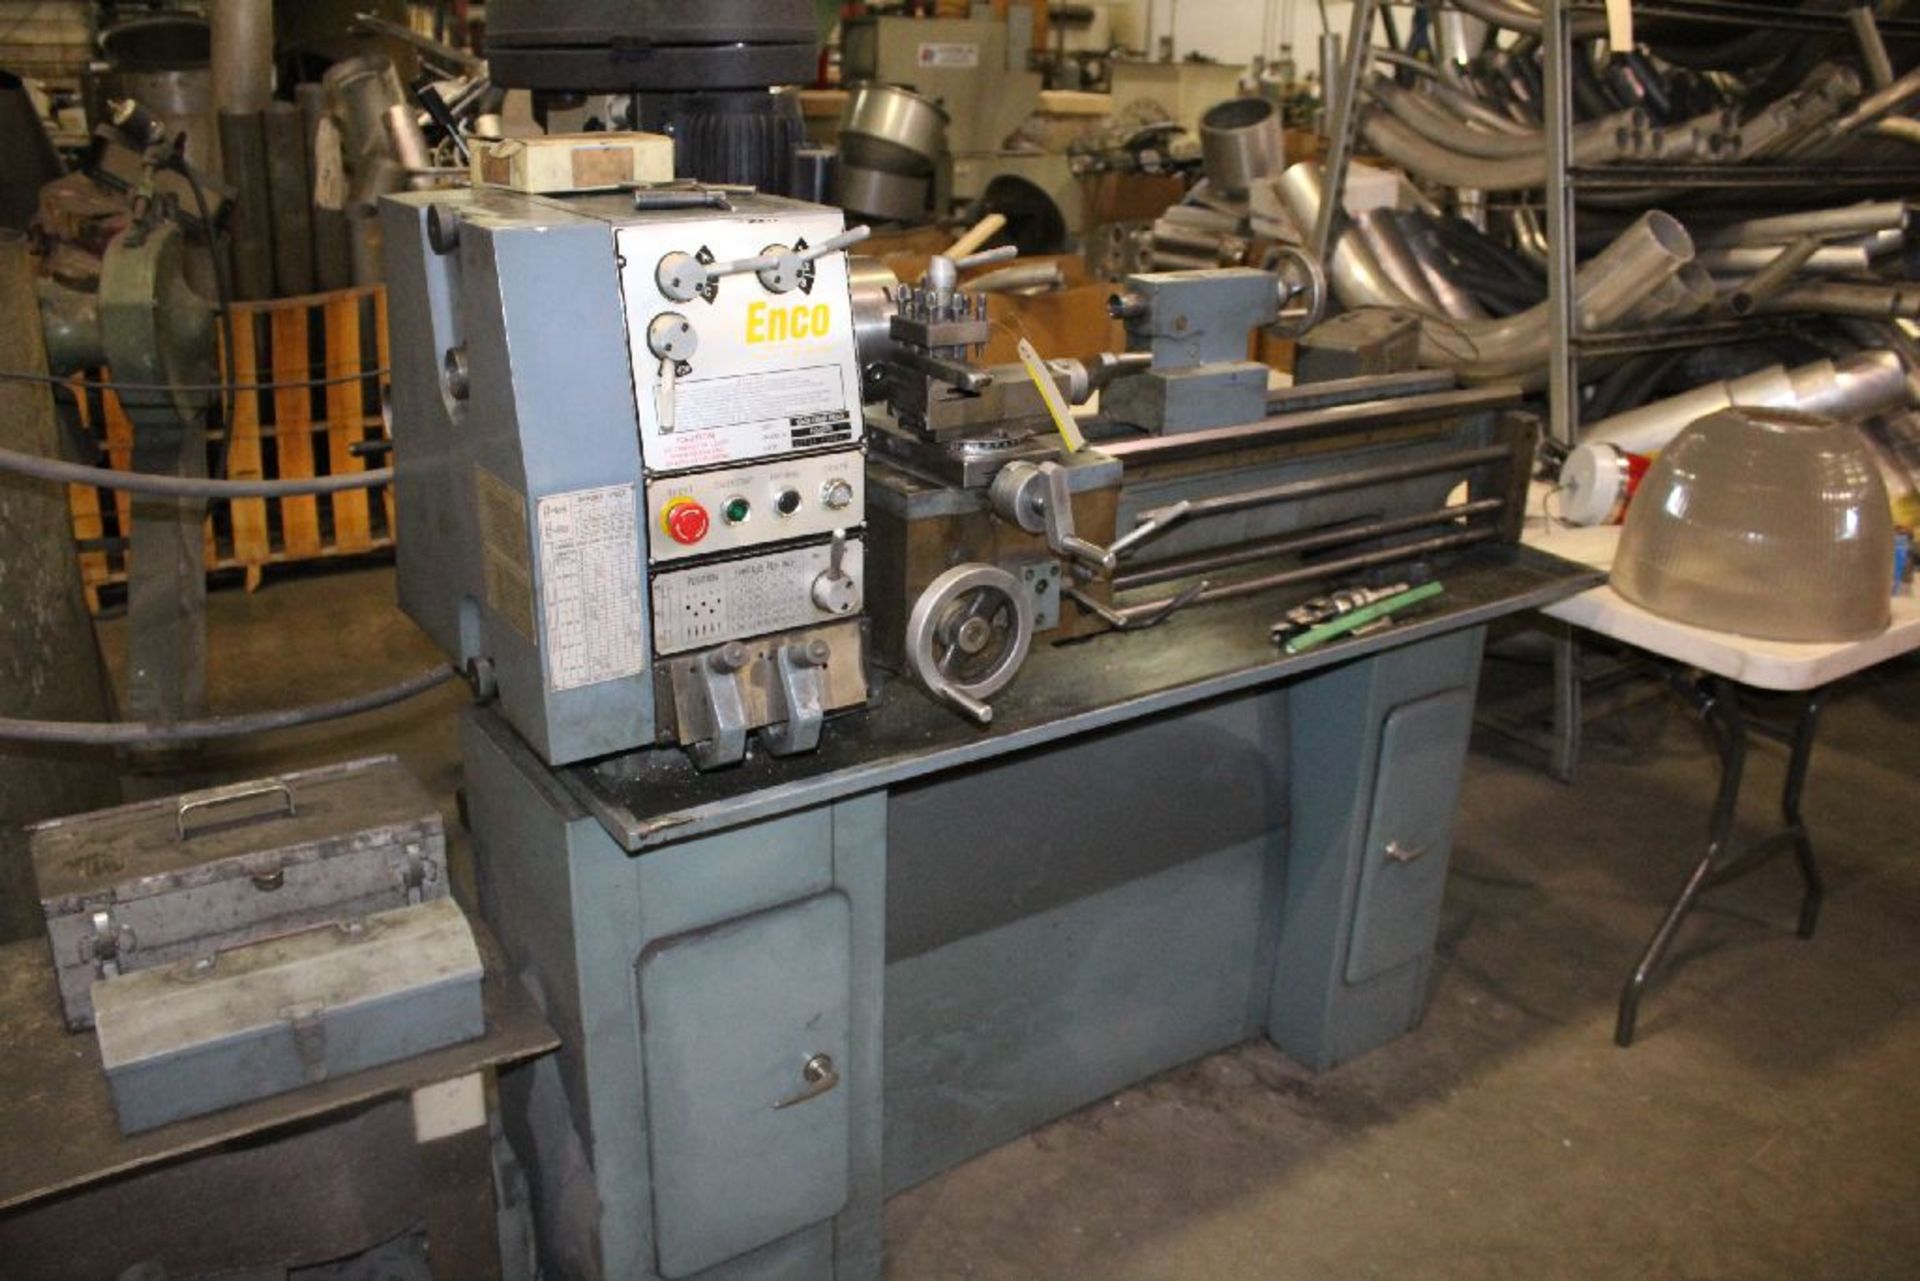 ENCO 12”X36” MODEL 110-2079 TOOLROOM LATHE, S/N 3273620048, 1550 RPM SPINDLE, INCH THREADING, 6” - Image 6 of 6